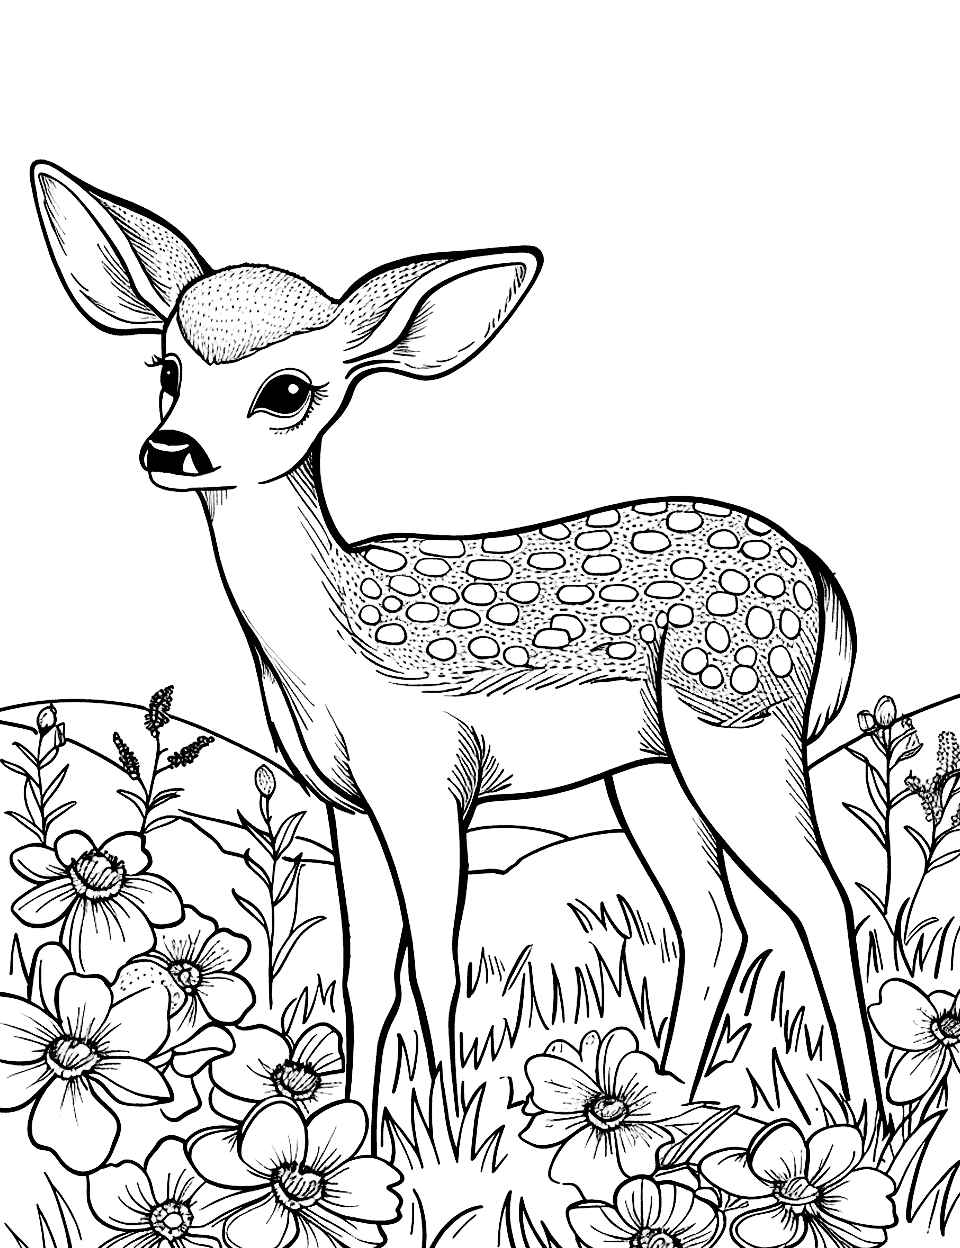 Fawn Amongst Spring Flowers Coloring Page - A fawn standing in a field of vibrant spring flowers, looking playful.